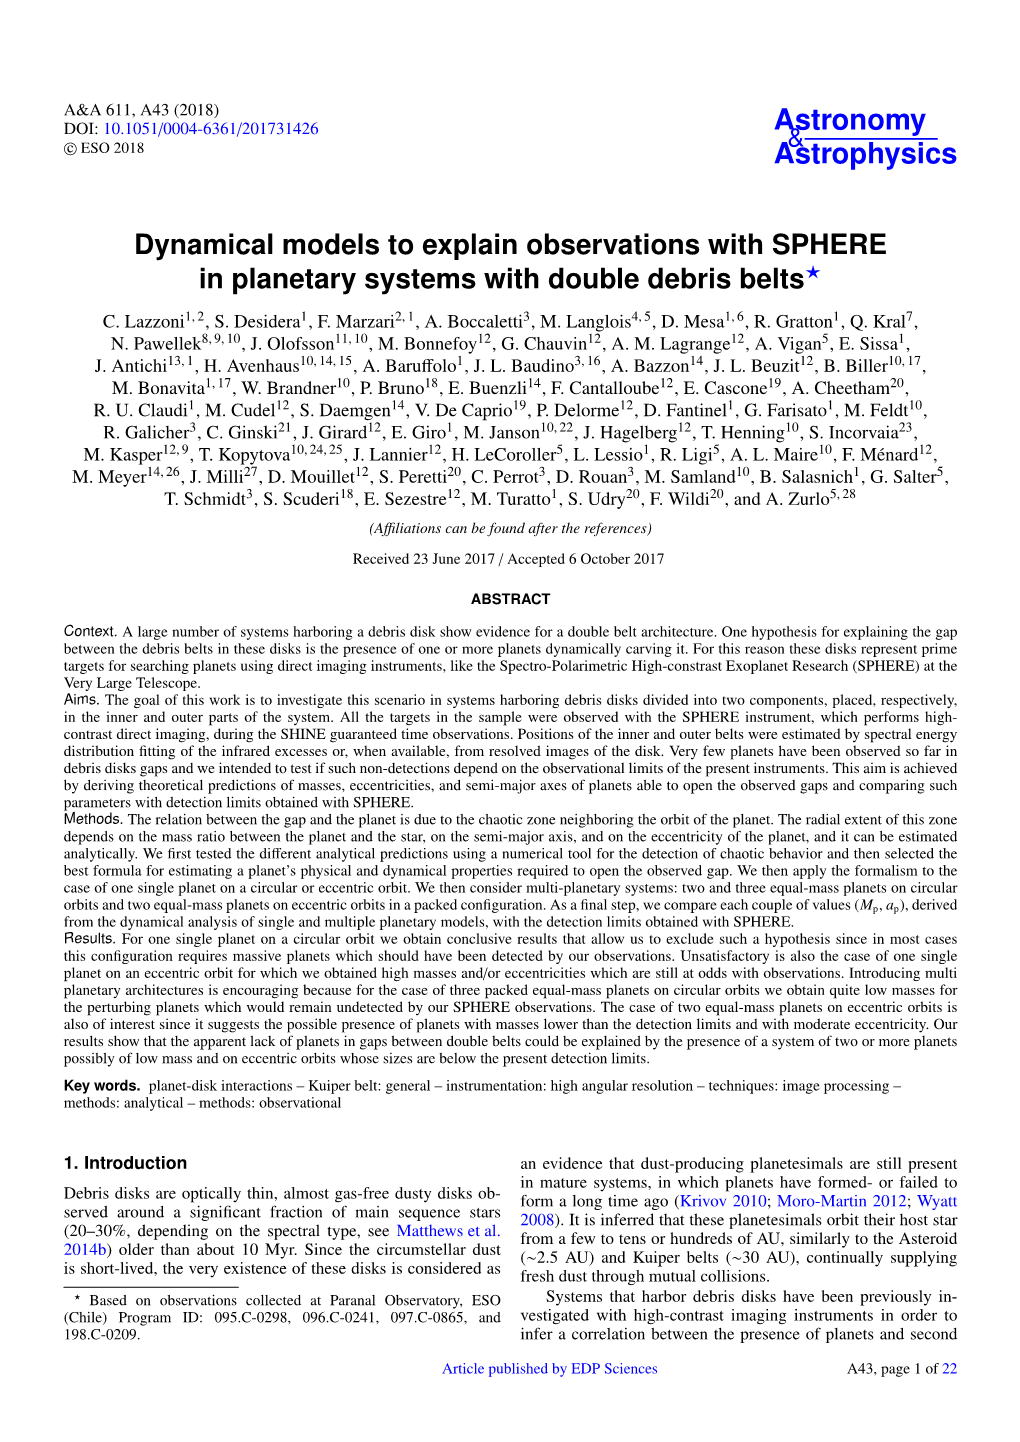 Dynamical Models to Explain Observations with SPHERE in Planetary Systems with Double Debris Belts? C